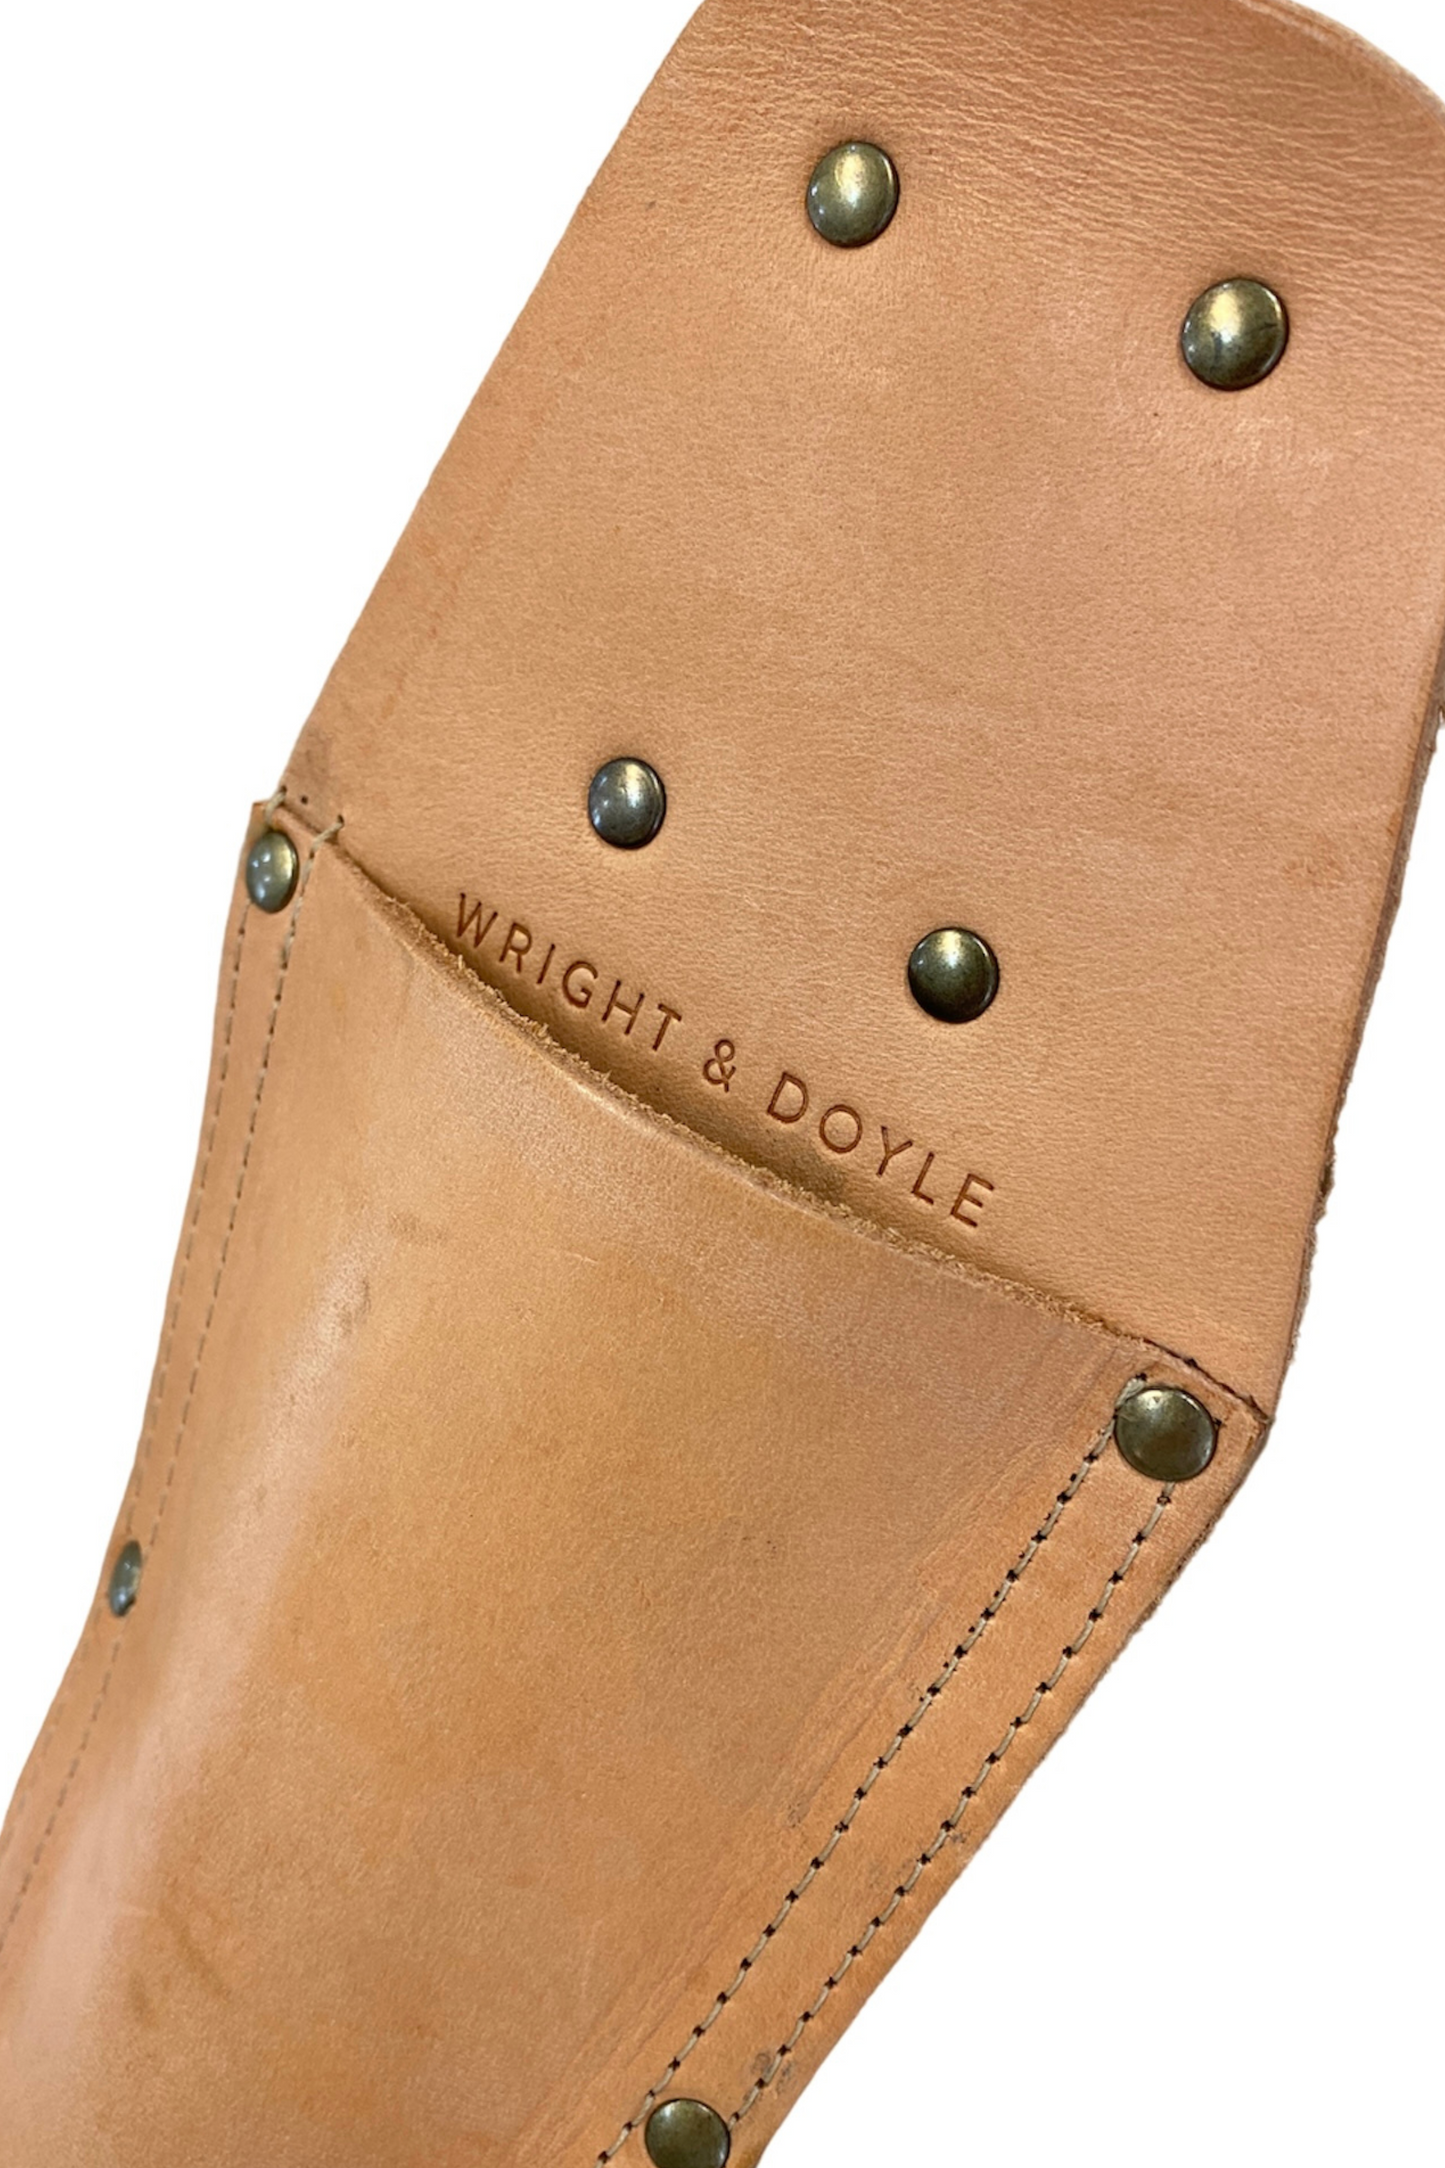 [WRIGHT&amp;DOYLE] Holster - Natural